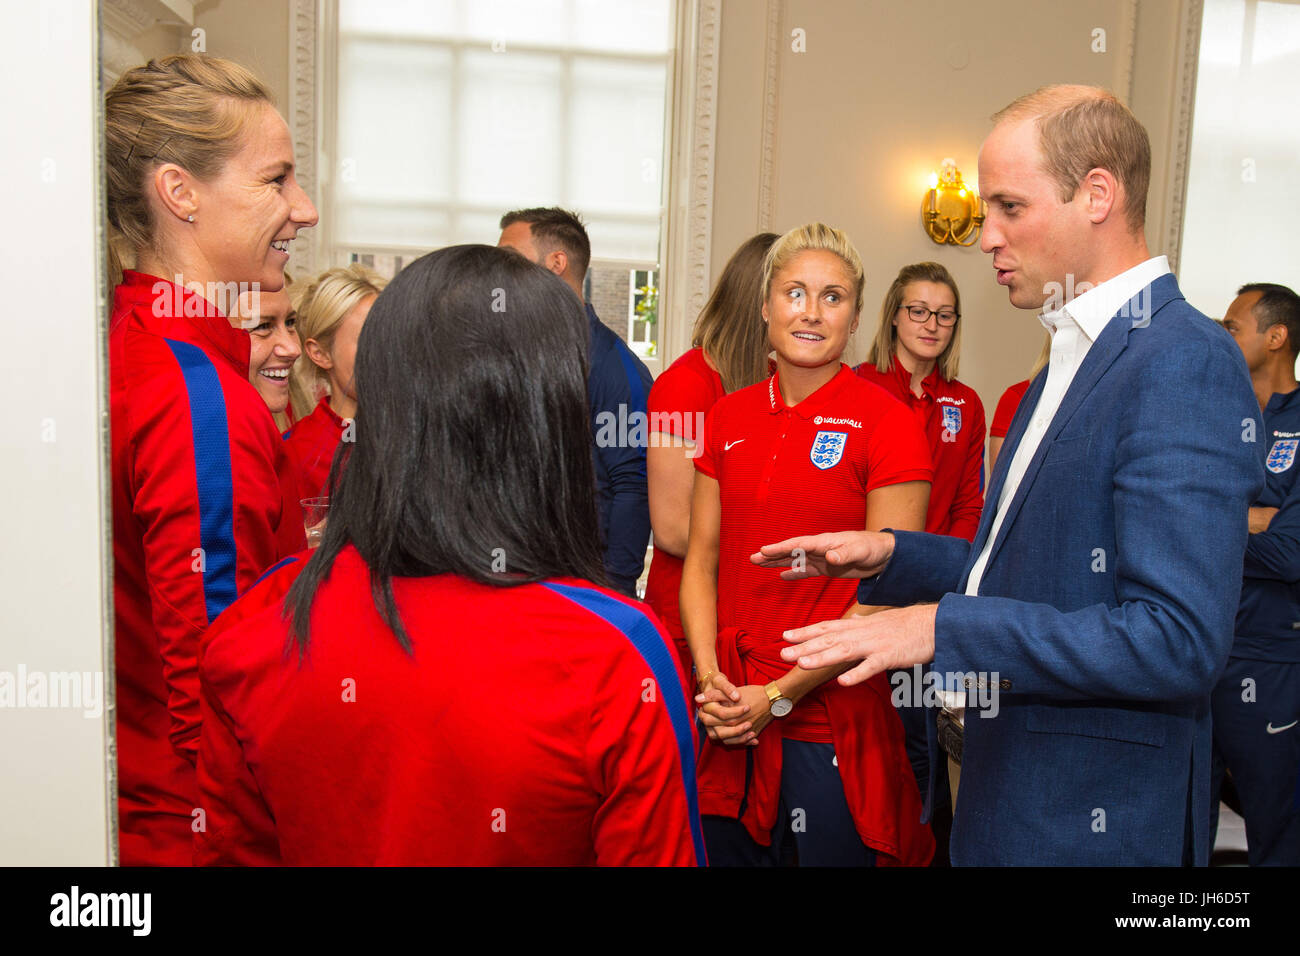 The Duke of Cambridge meets members of the England Women football team during a reception for the England Women football team at Kensington Palace in London. Stock Photo